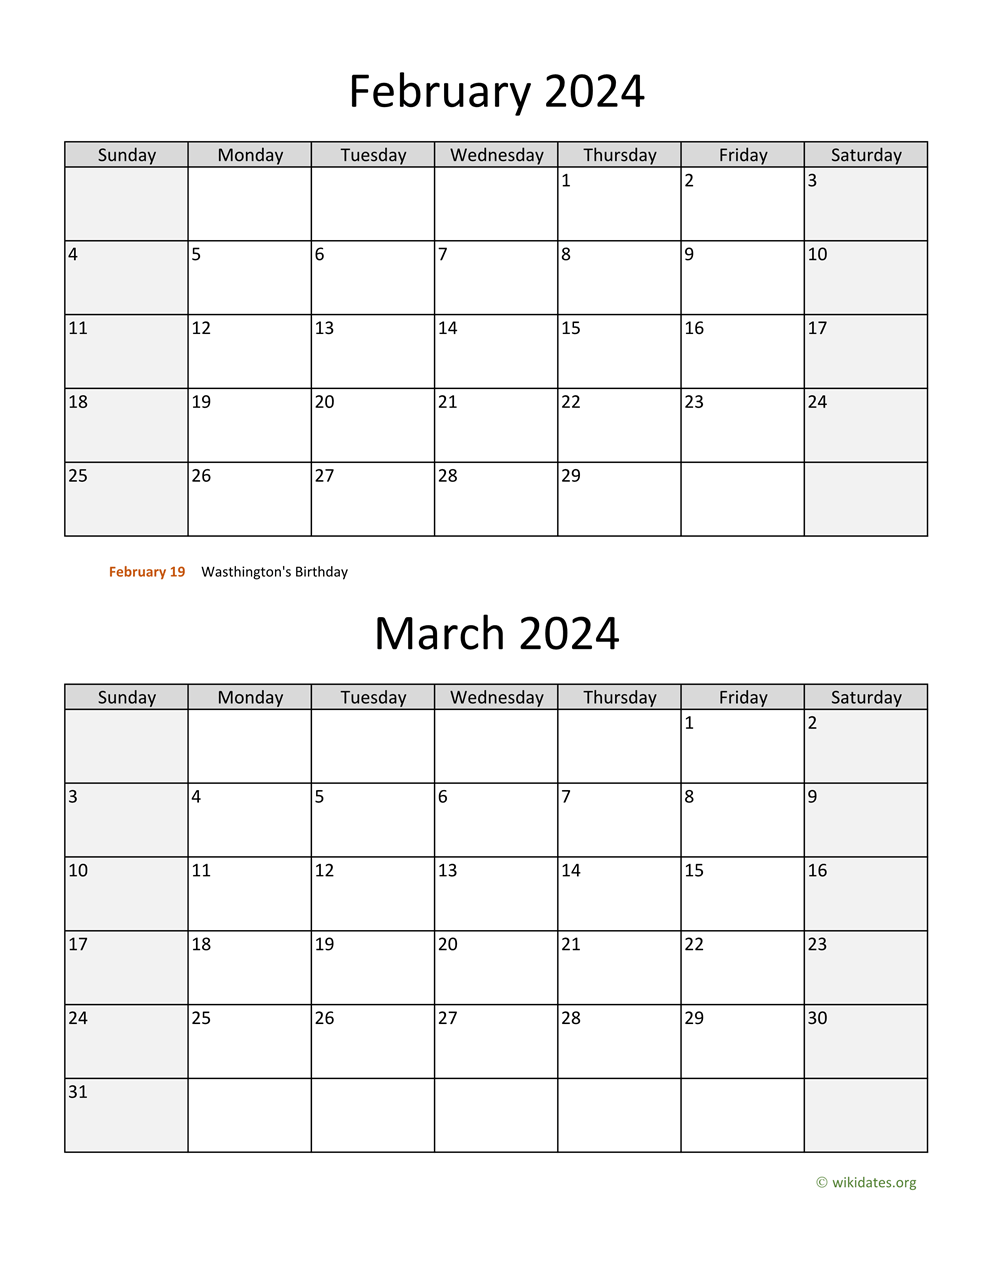 February And March 2024 Calendar | Wikidates for Printable Calendar For February And March 2024